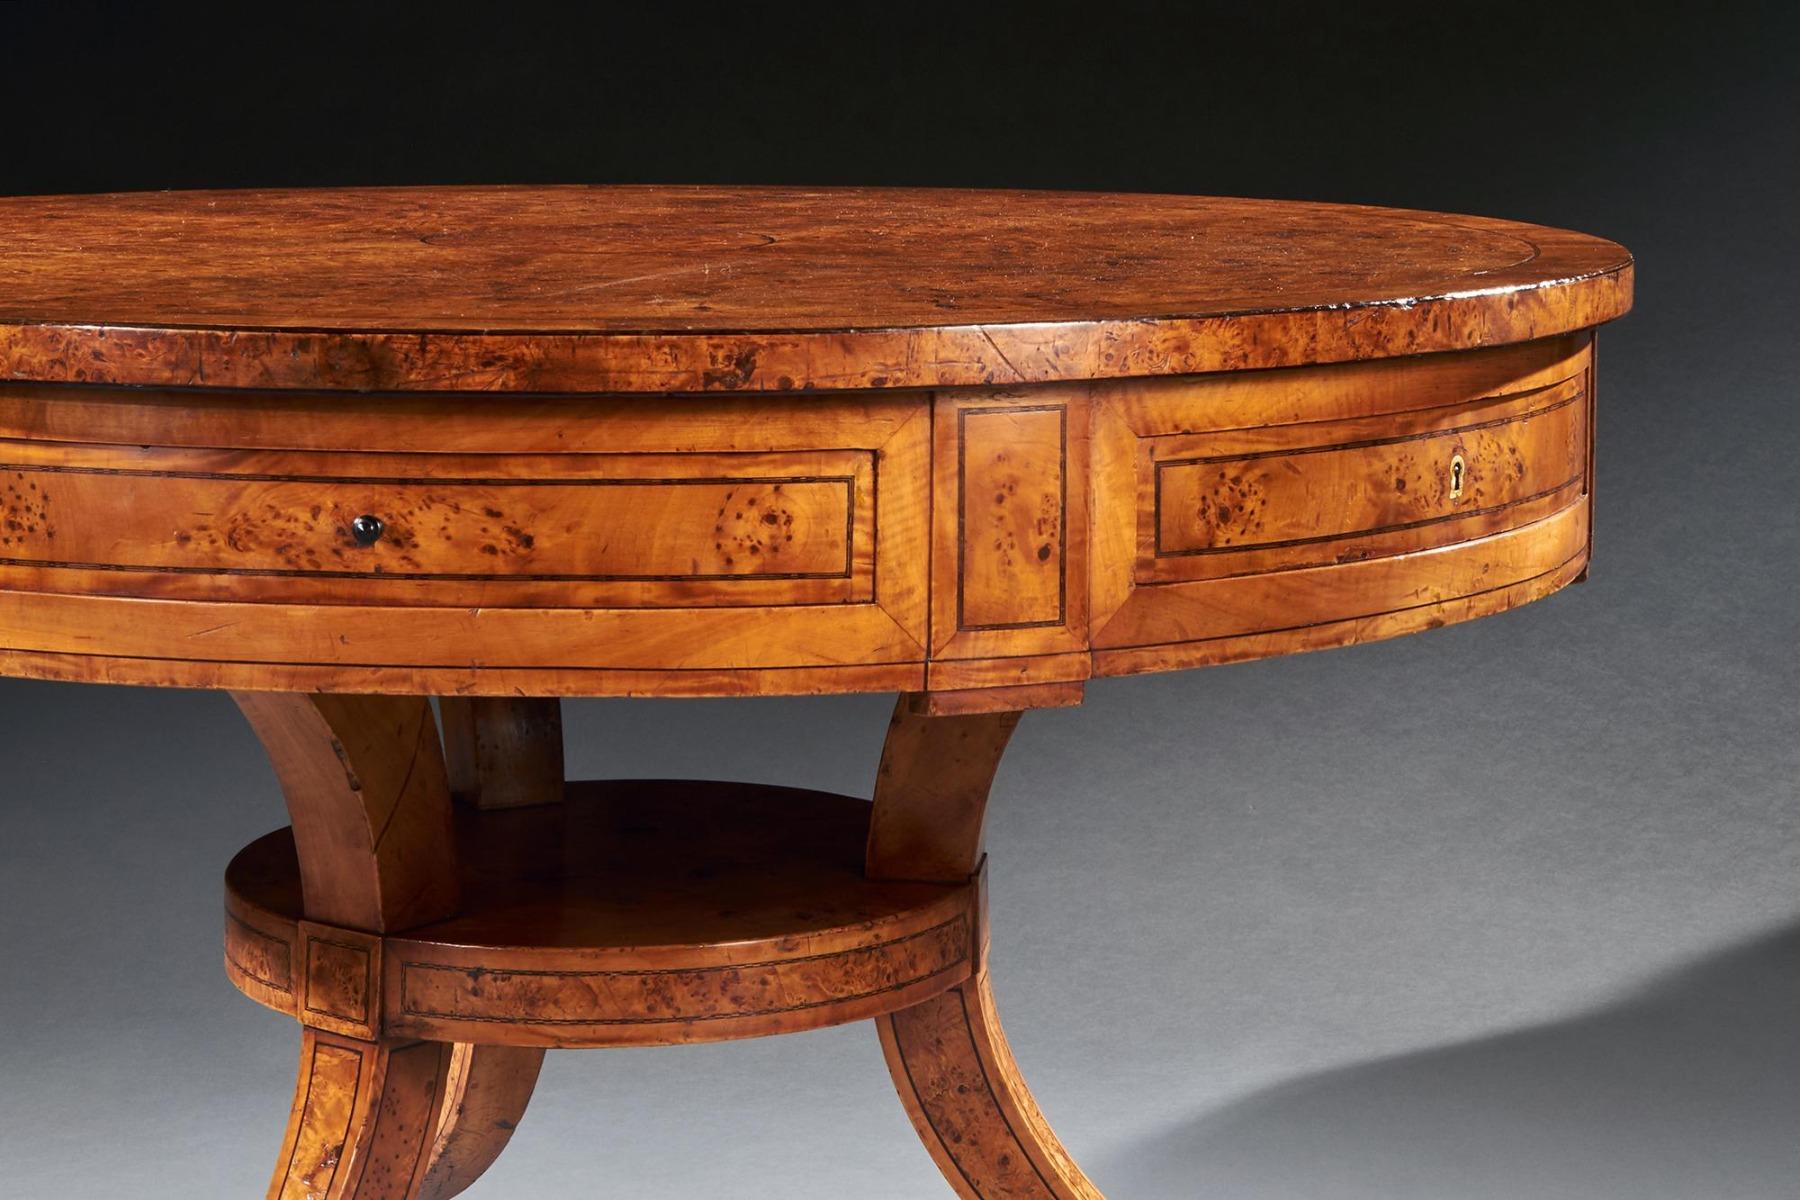 Rare Early 19th Century Scandinavian Burr Root Maple Drum Table For Sale 2